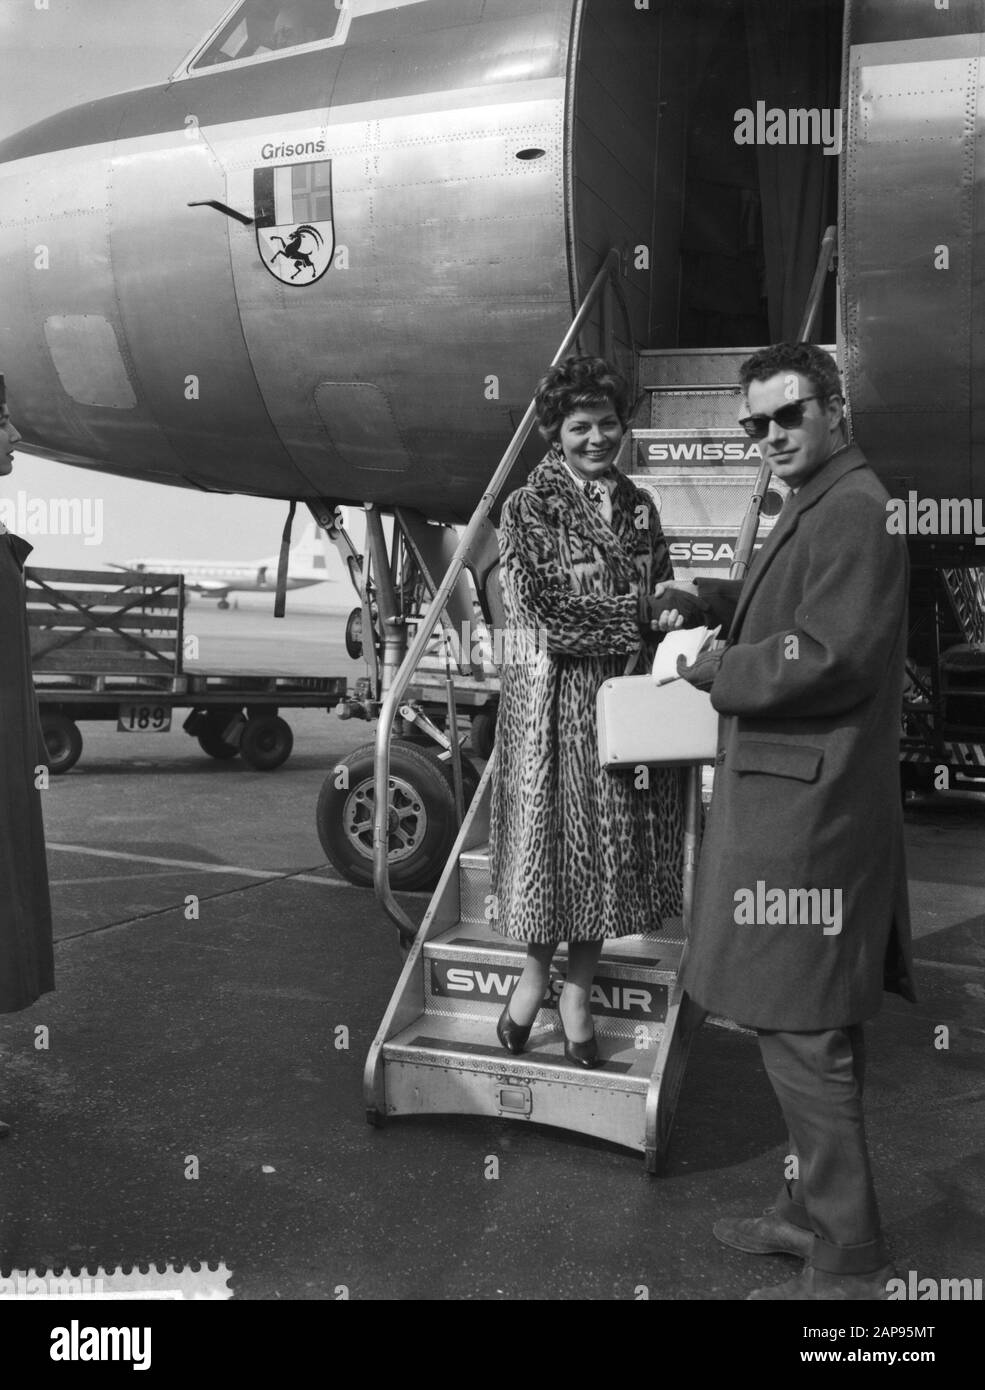 Arrival Lys Assia (Switzerland) at Schiphol for the Eurovision Song Contest 1958 Airplane Staircase Date: 11 March 1958 Location: Noord-Holland, Schiphol Keywords: arrivals, artists, music, song festivals, airfields Personal name: Assia Lys Stock Photo